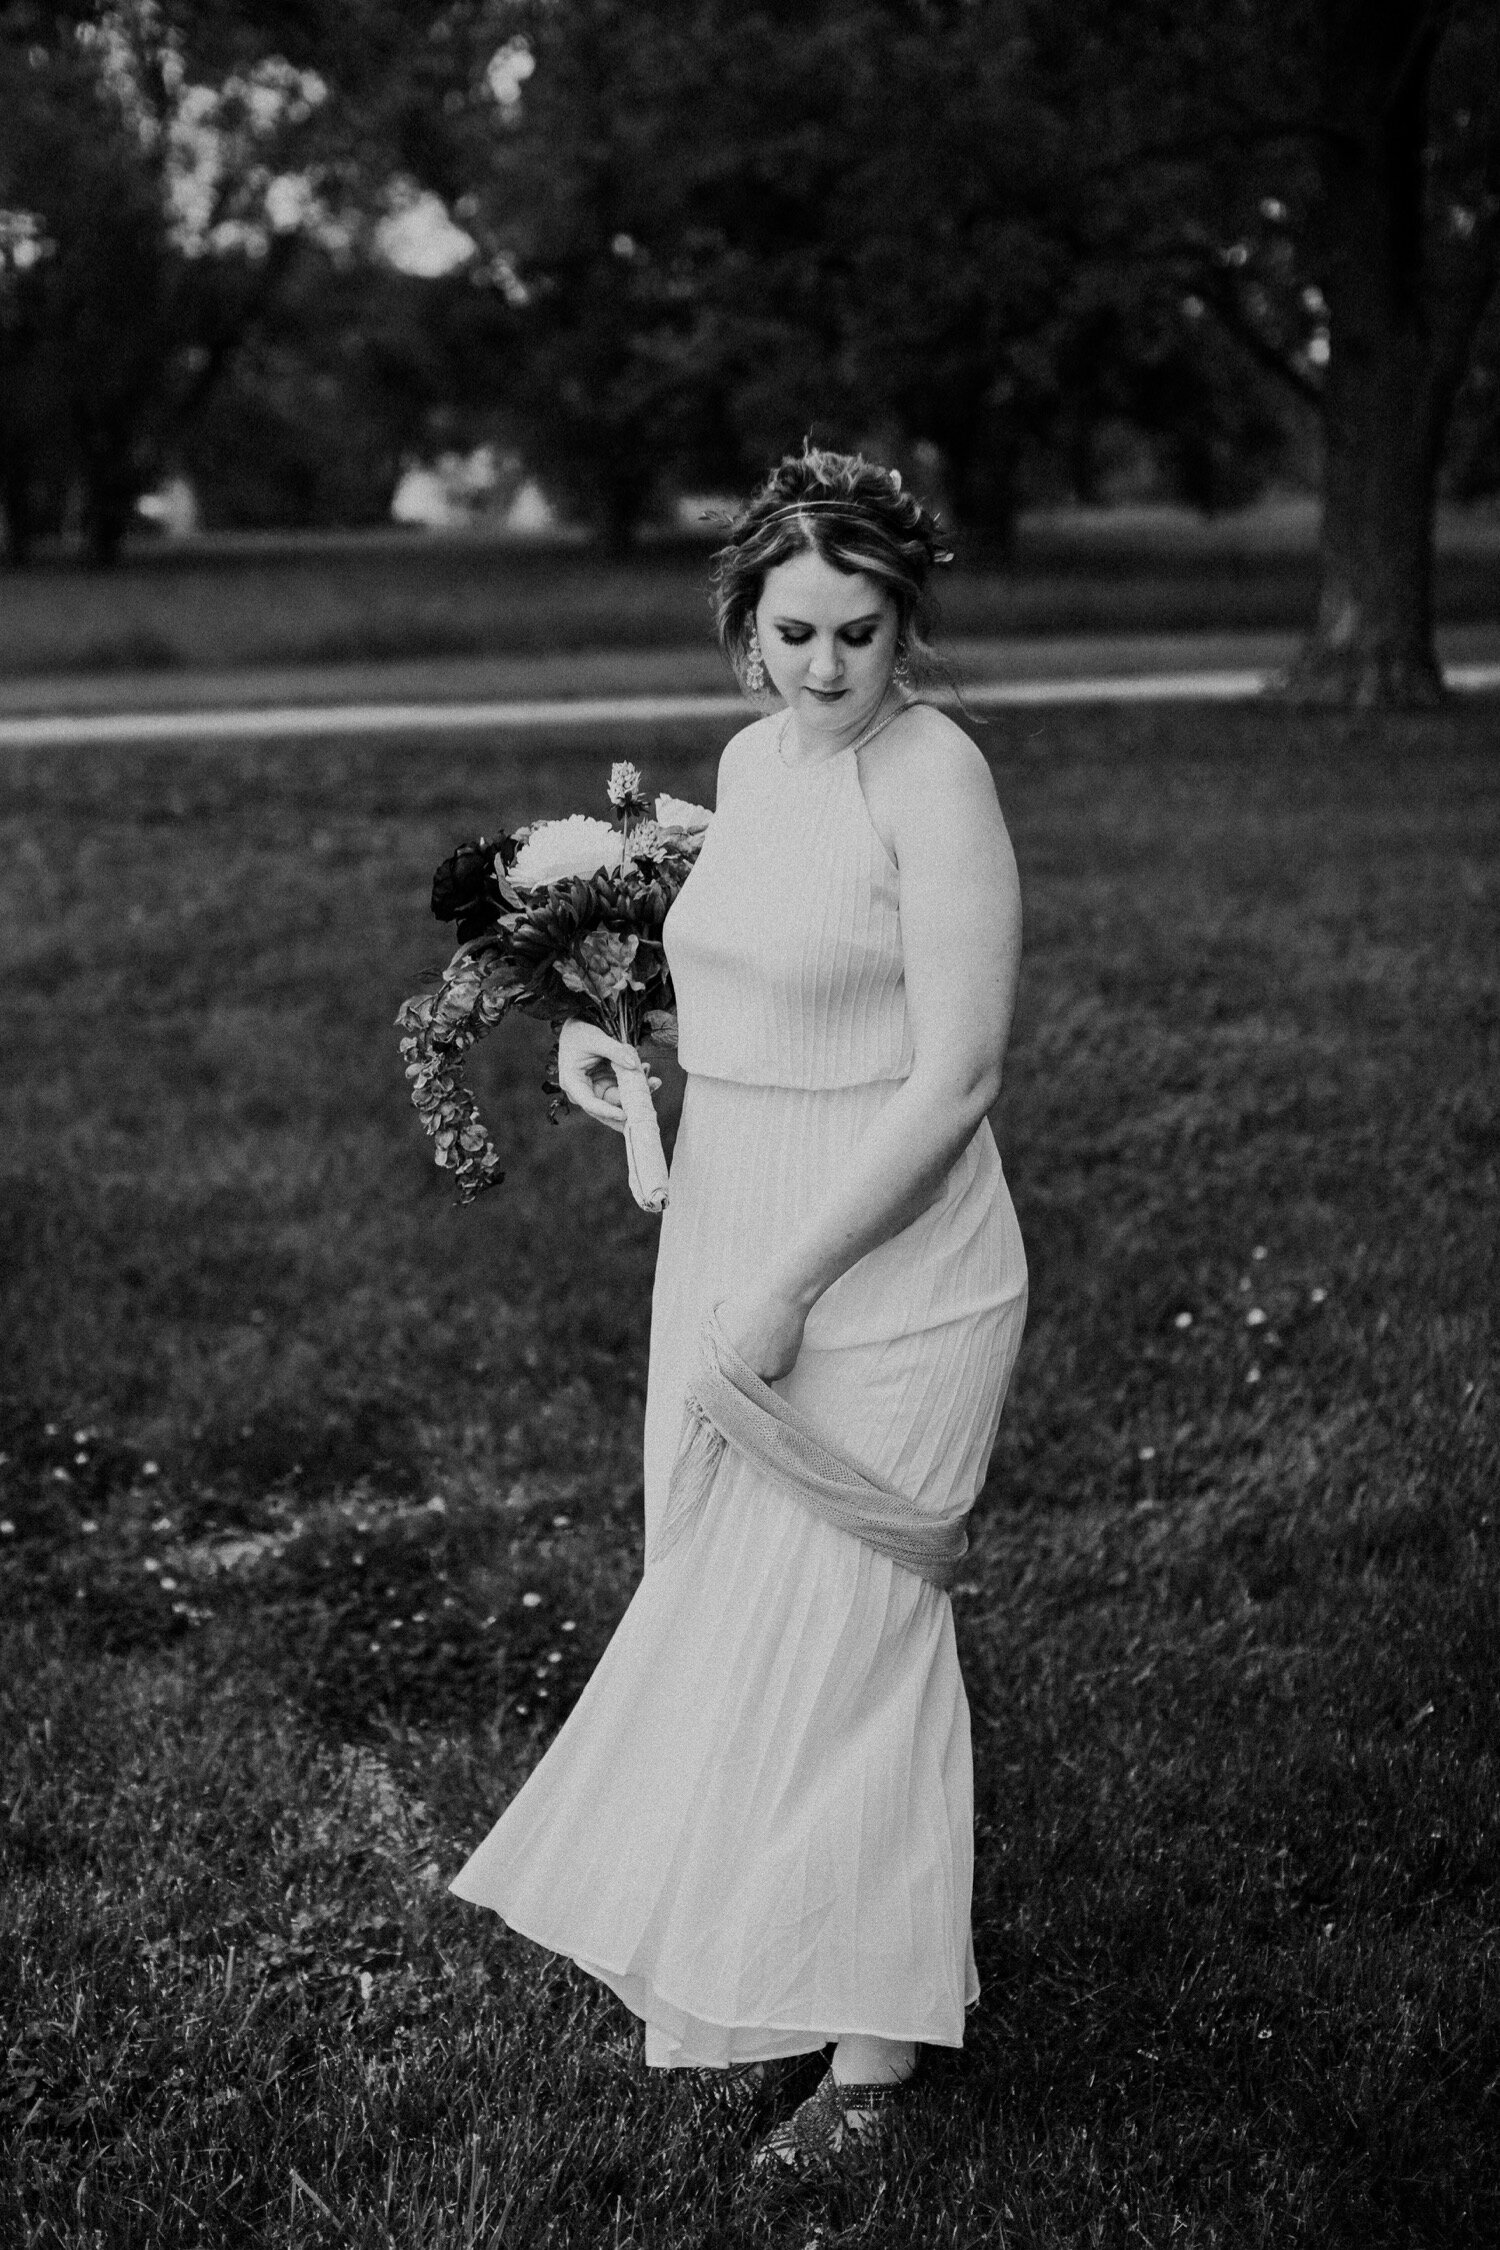 14_Maris&Lucas-53-2_Spring Elopement wedding at Belvoir Winery and Inn in Kansas City, Missouri photographed by Kelsey Diane Photography.jpg